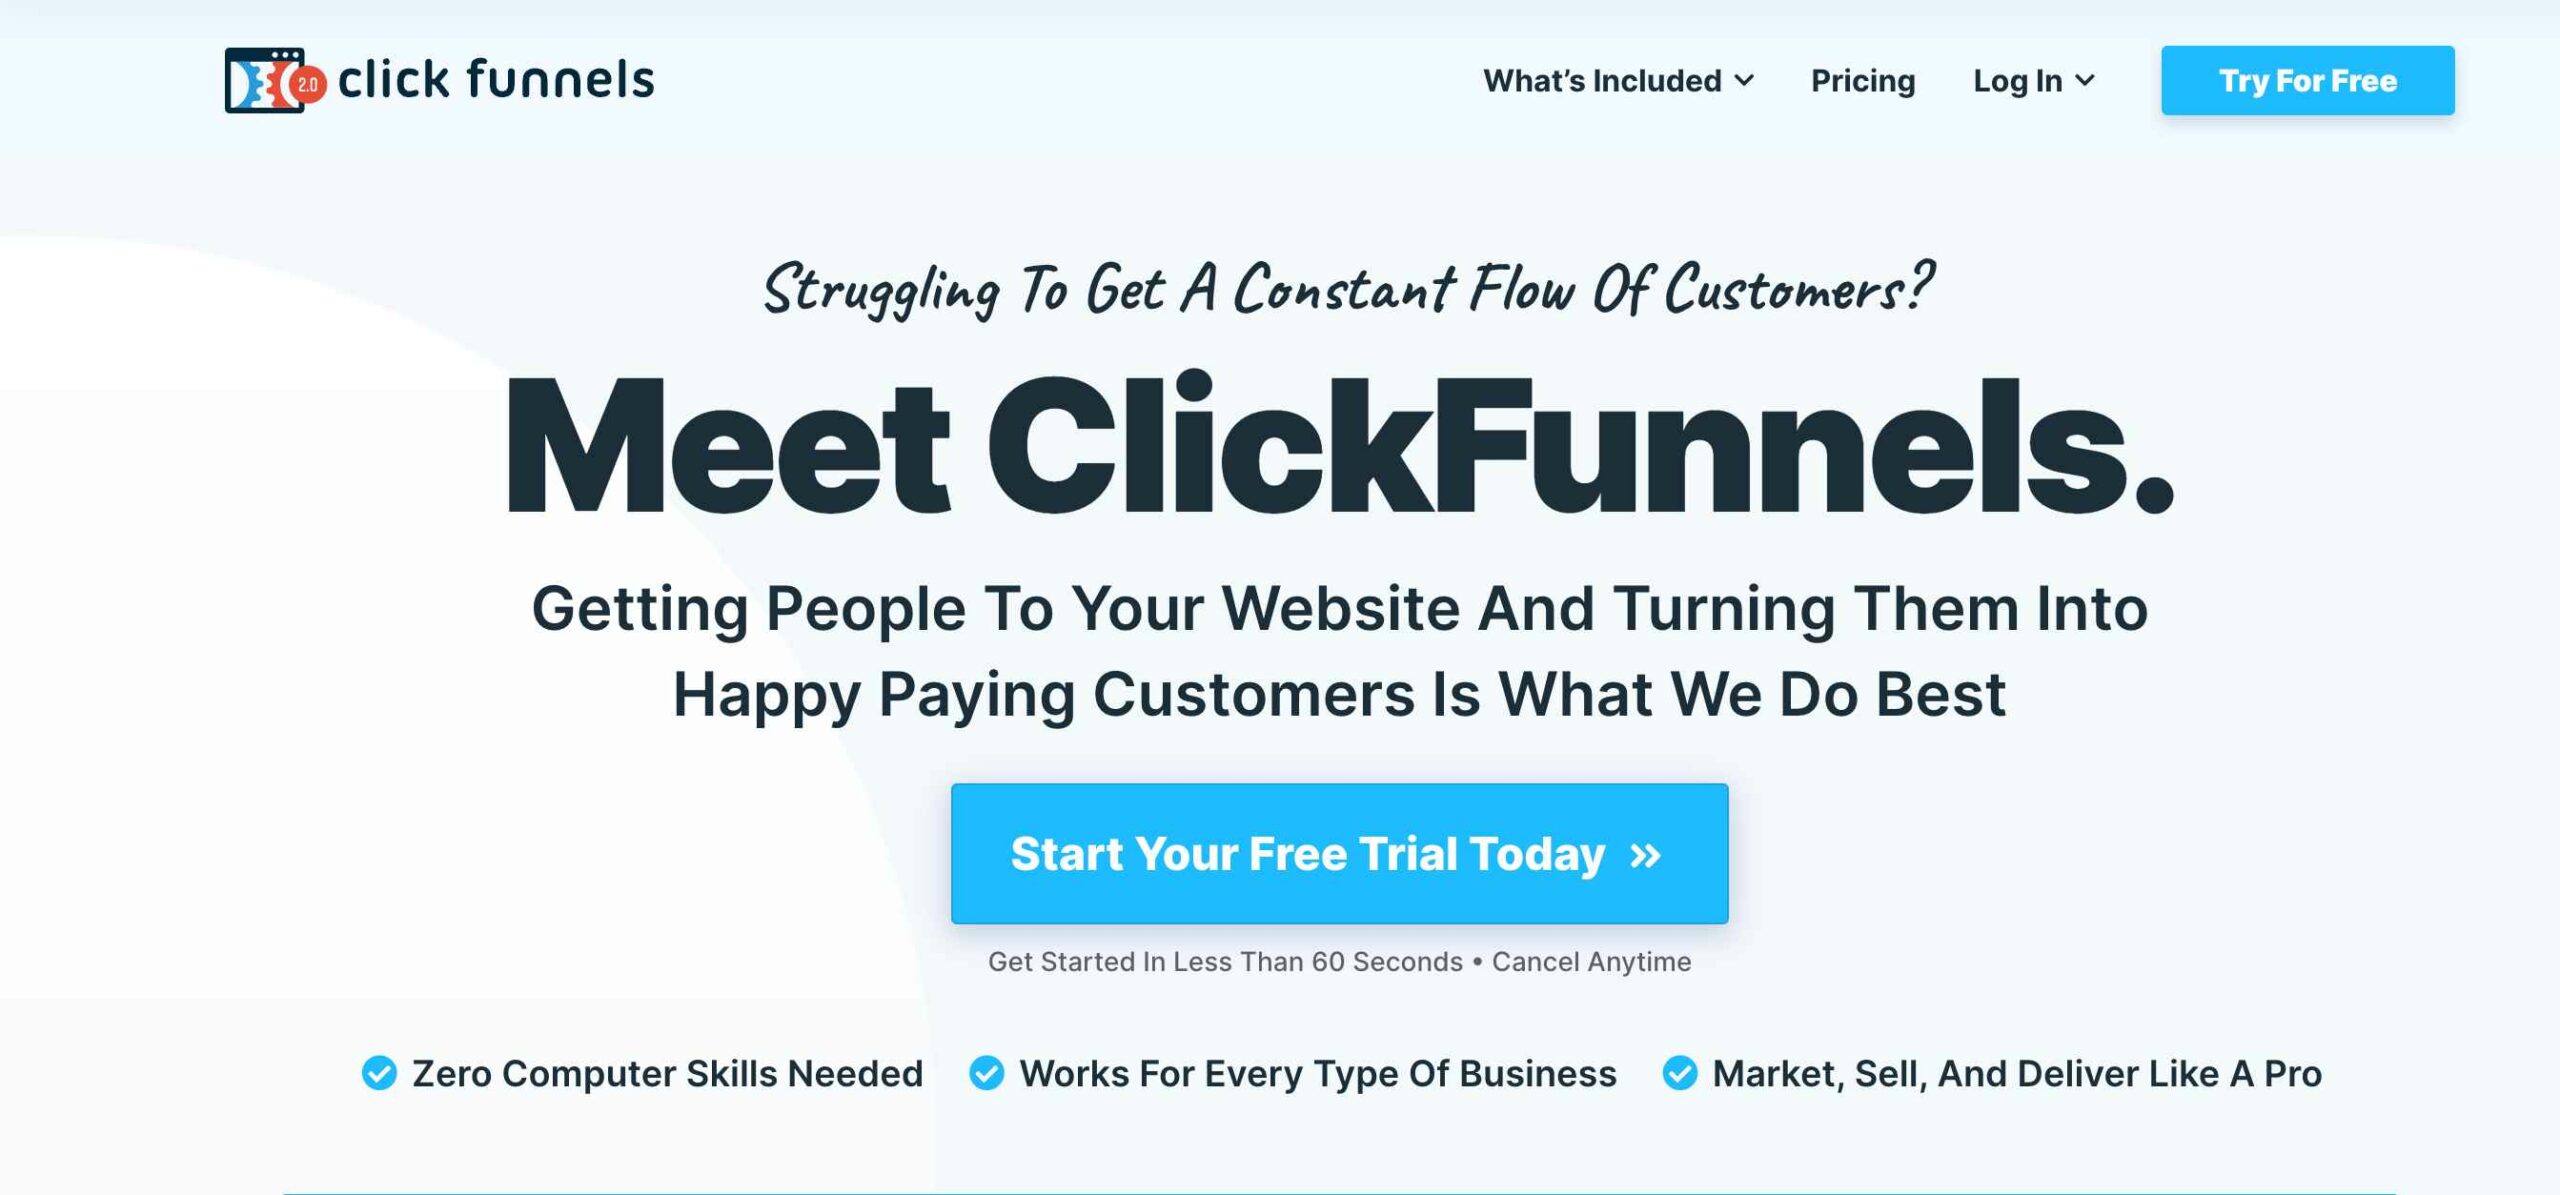 Clickfunnels Homepage